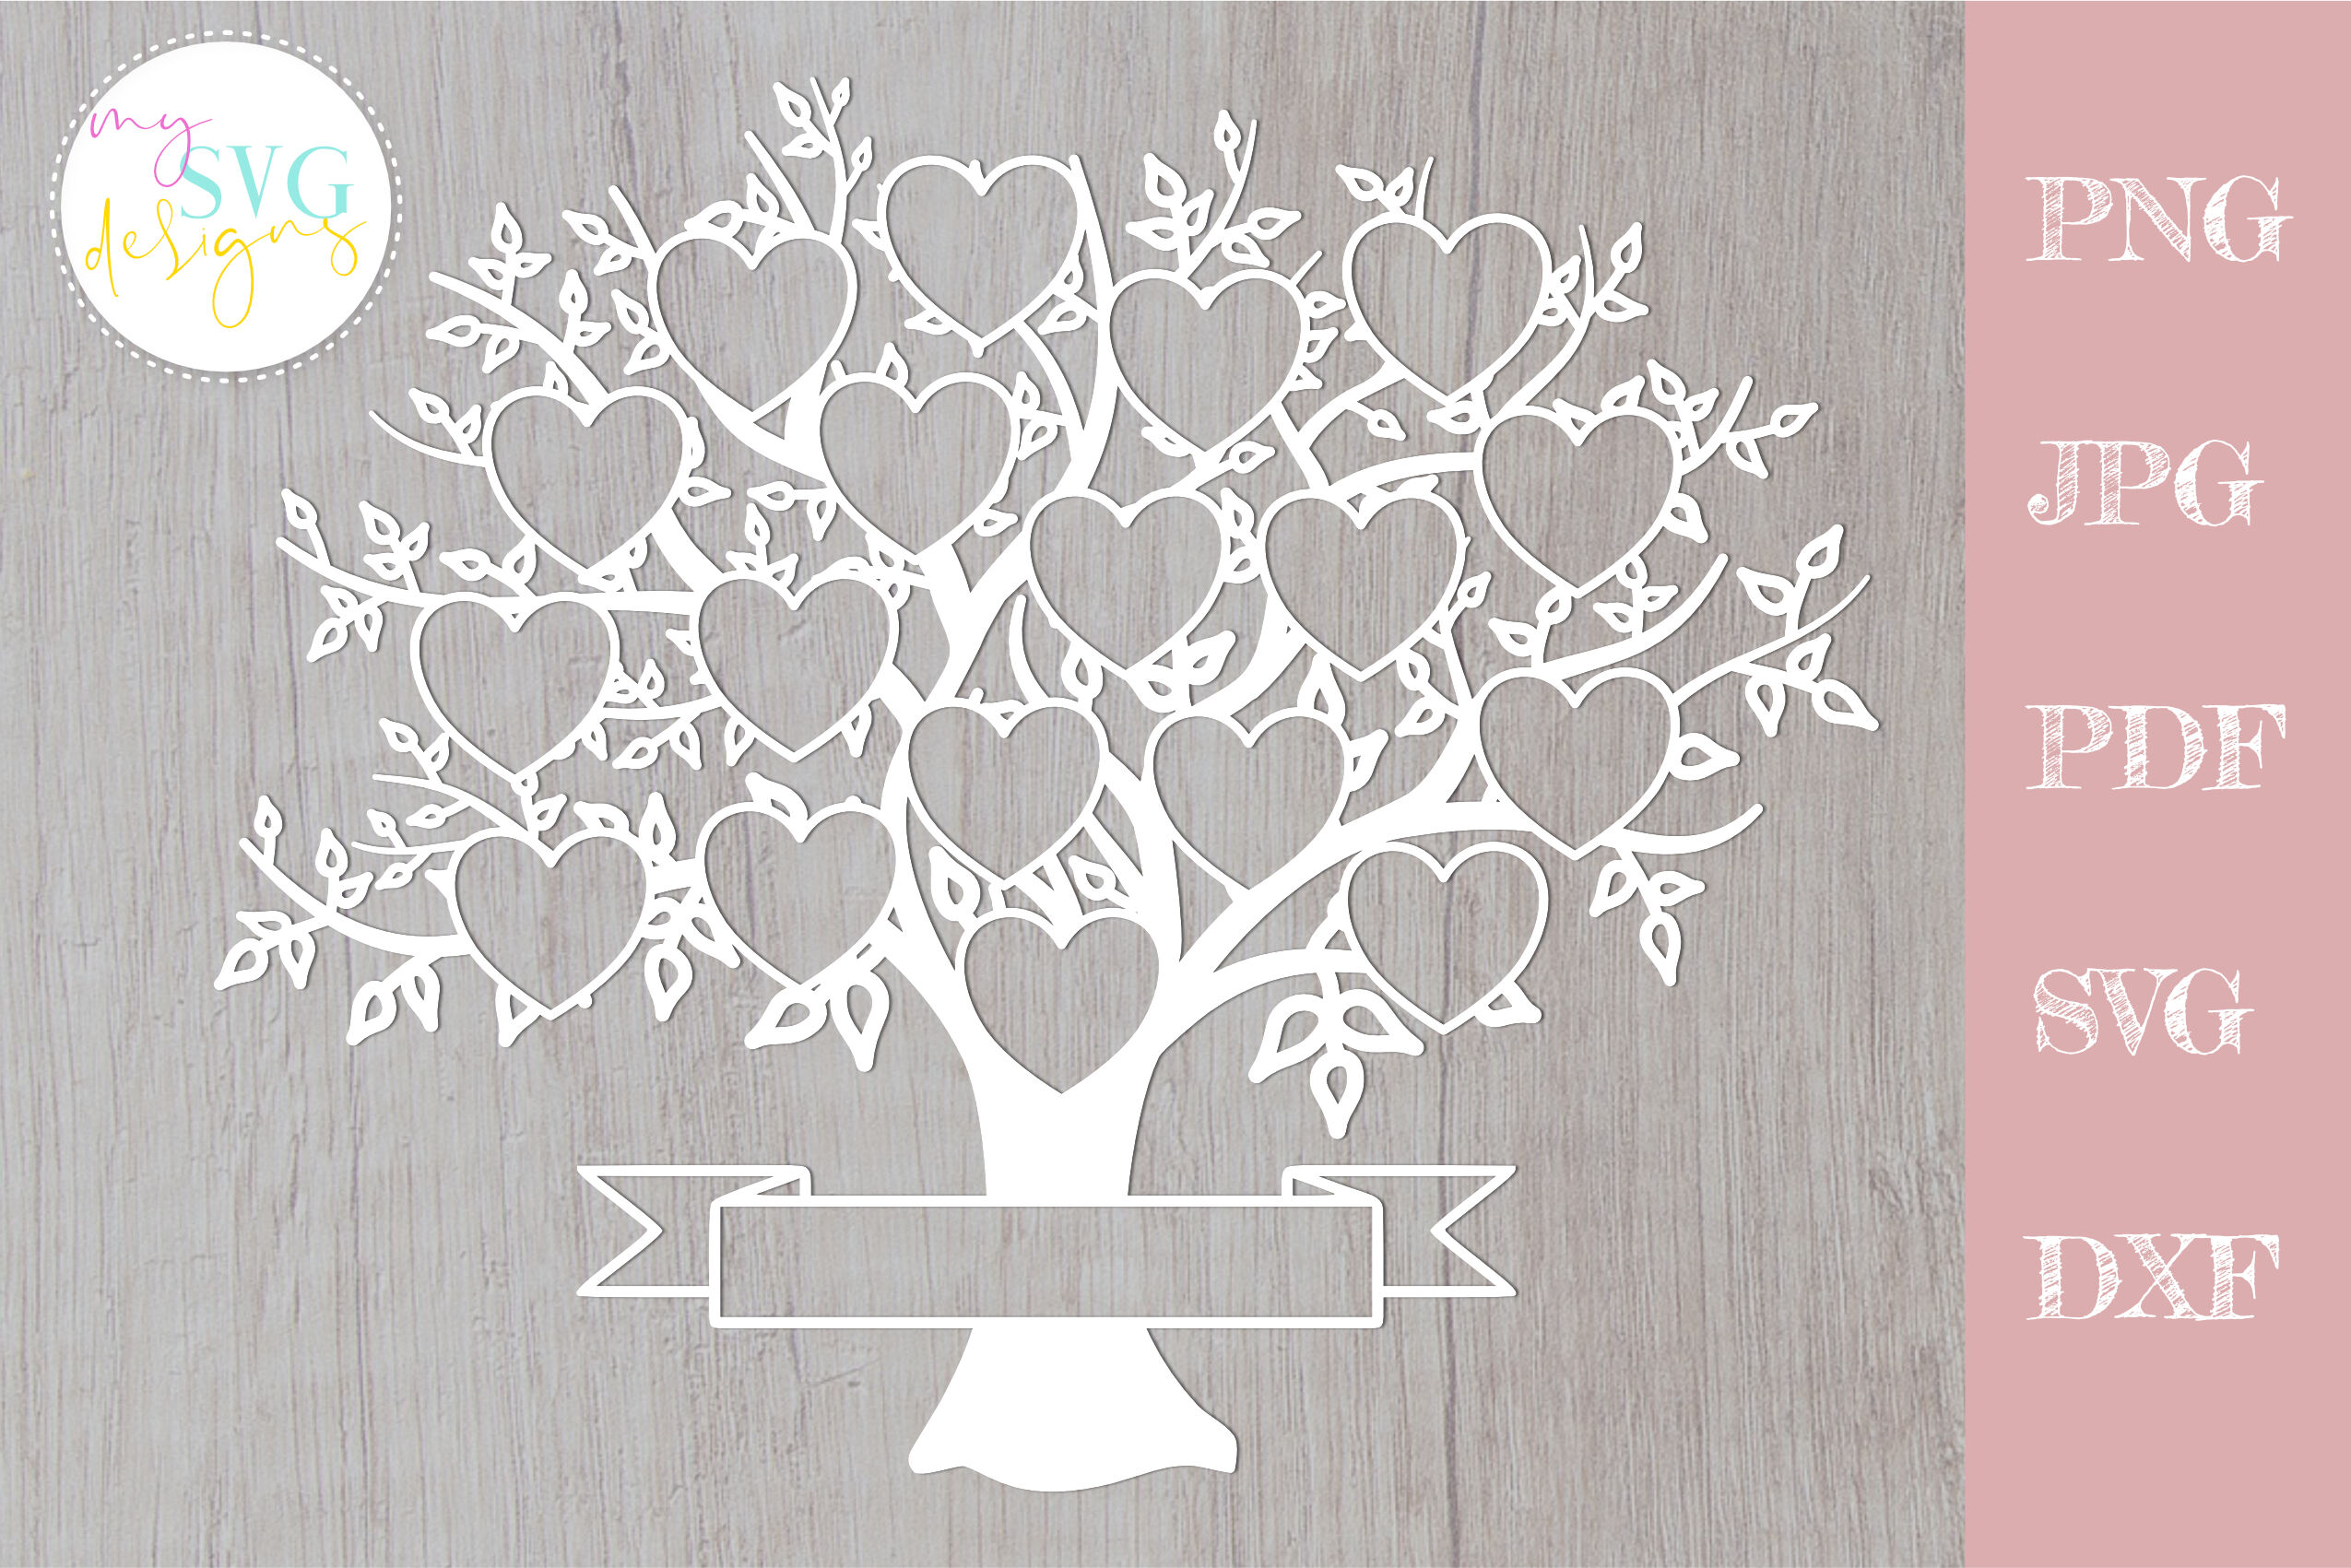 Download Family tree svg 18 members, svg family tree, family ...